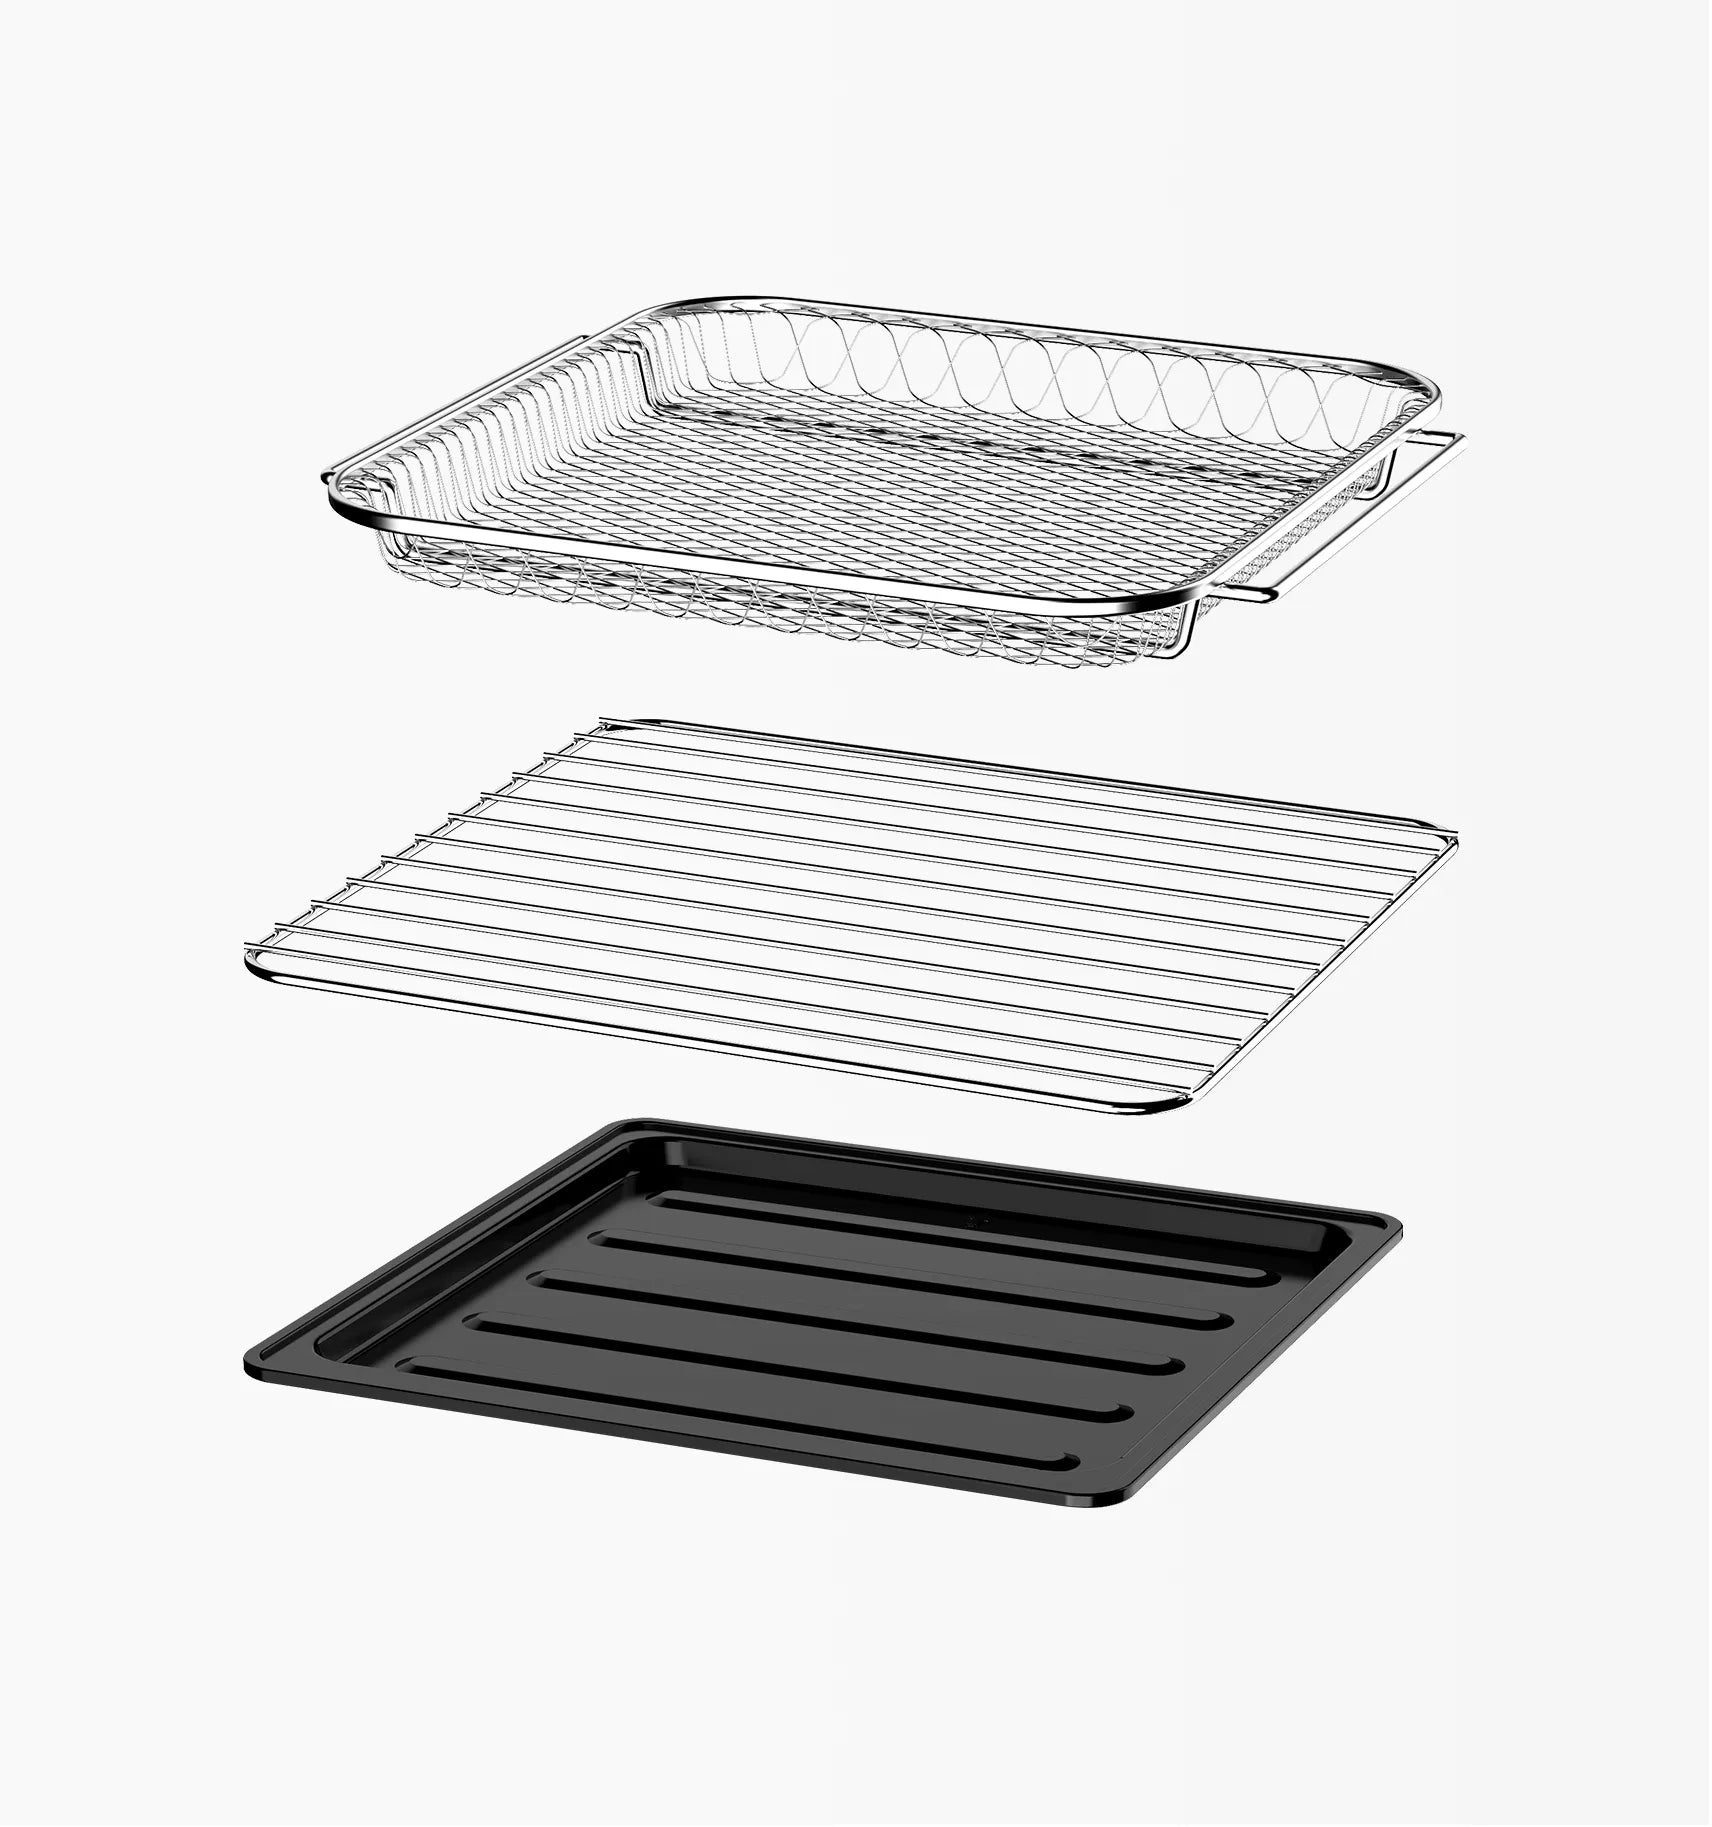 Complete set of Ruokala air fryer accessories including a mesh basket, grilling rack, and drip tray for versatile cooking options.